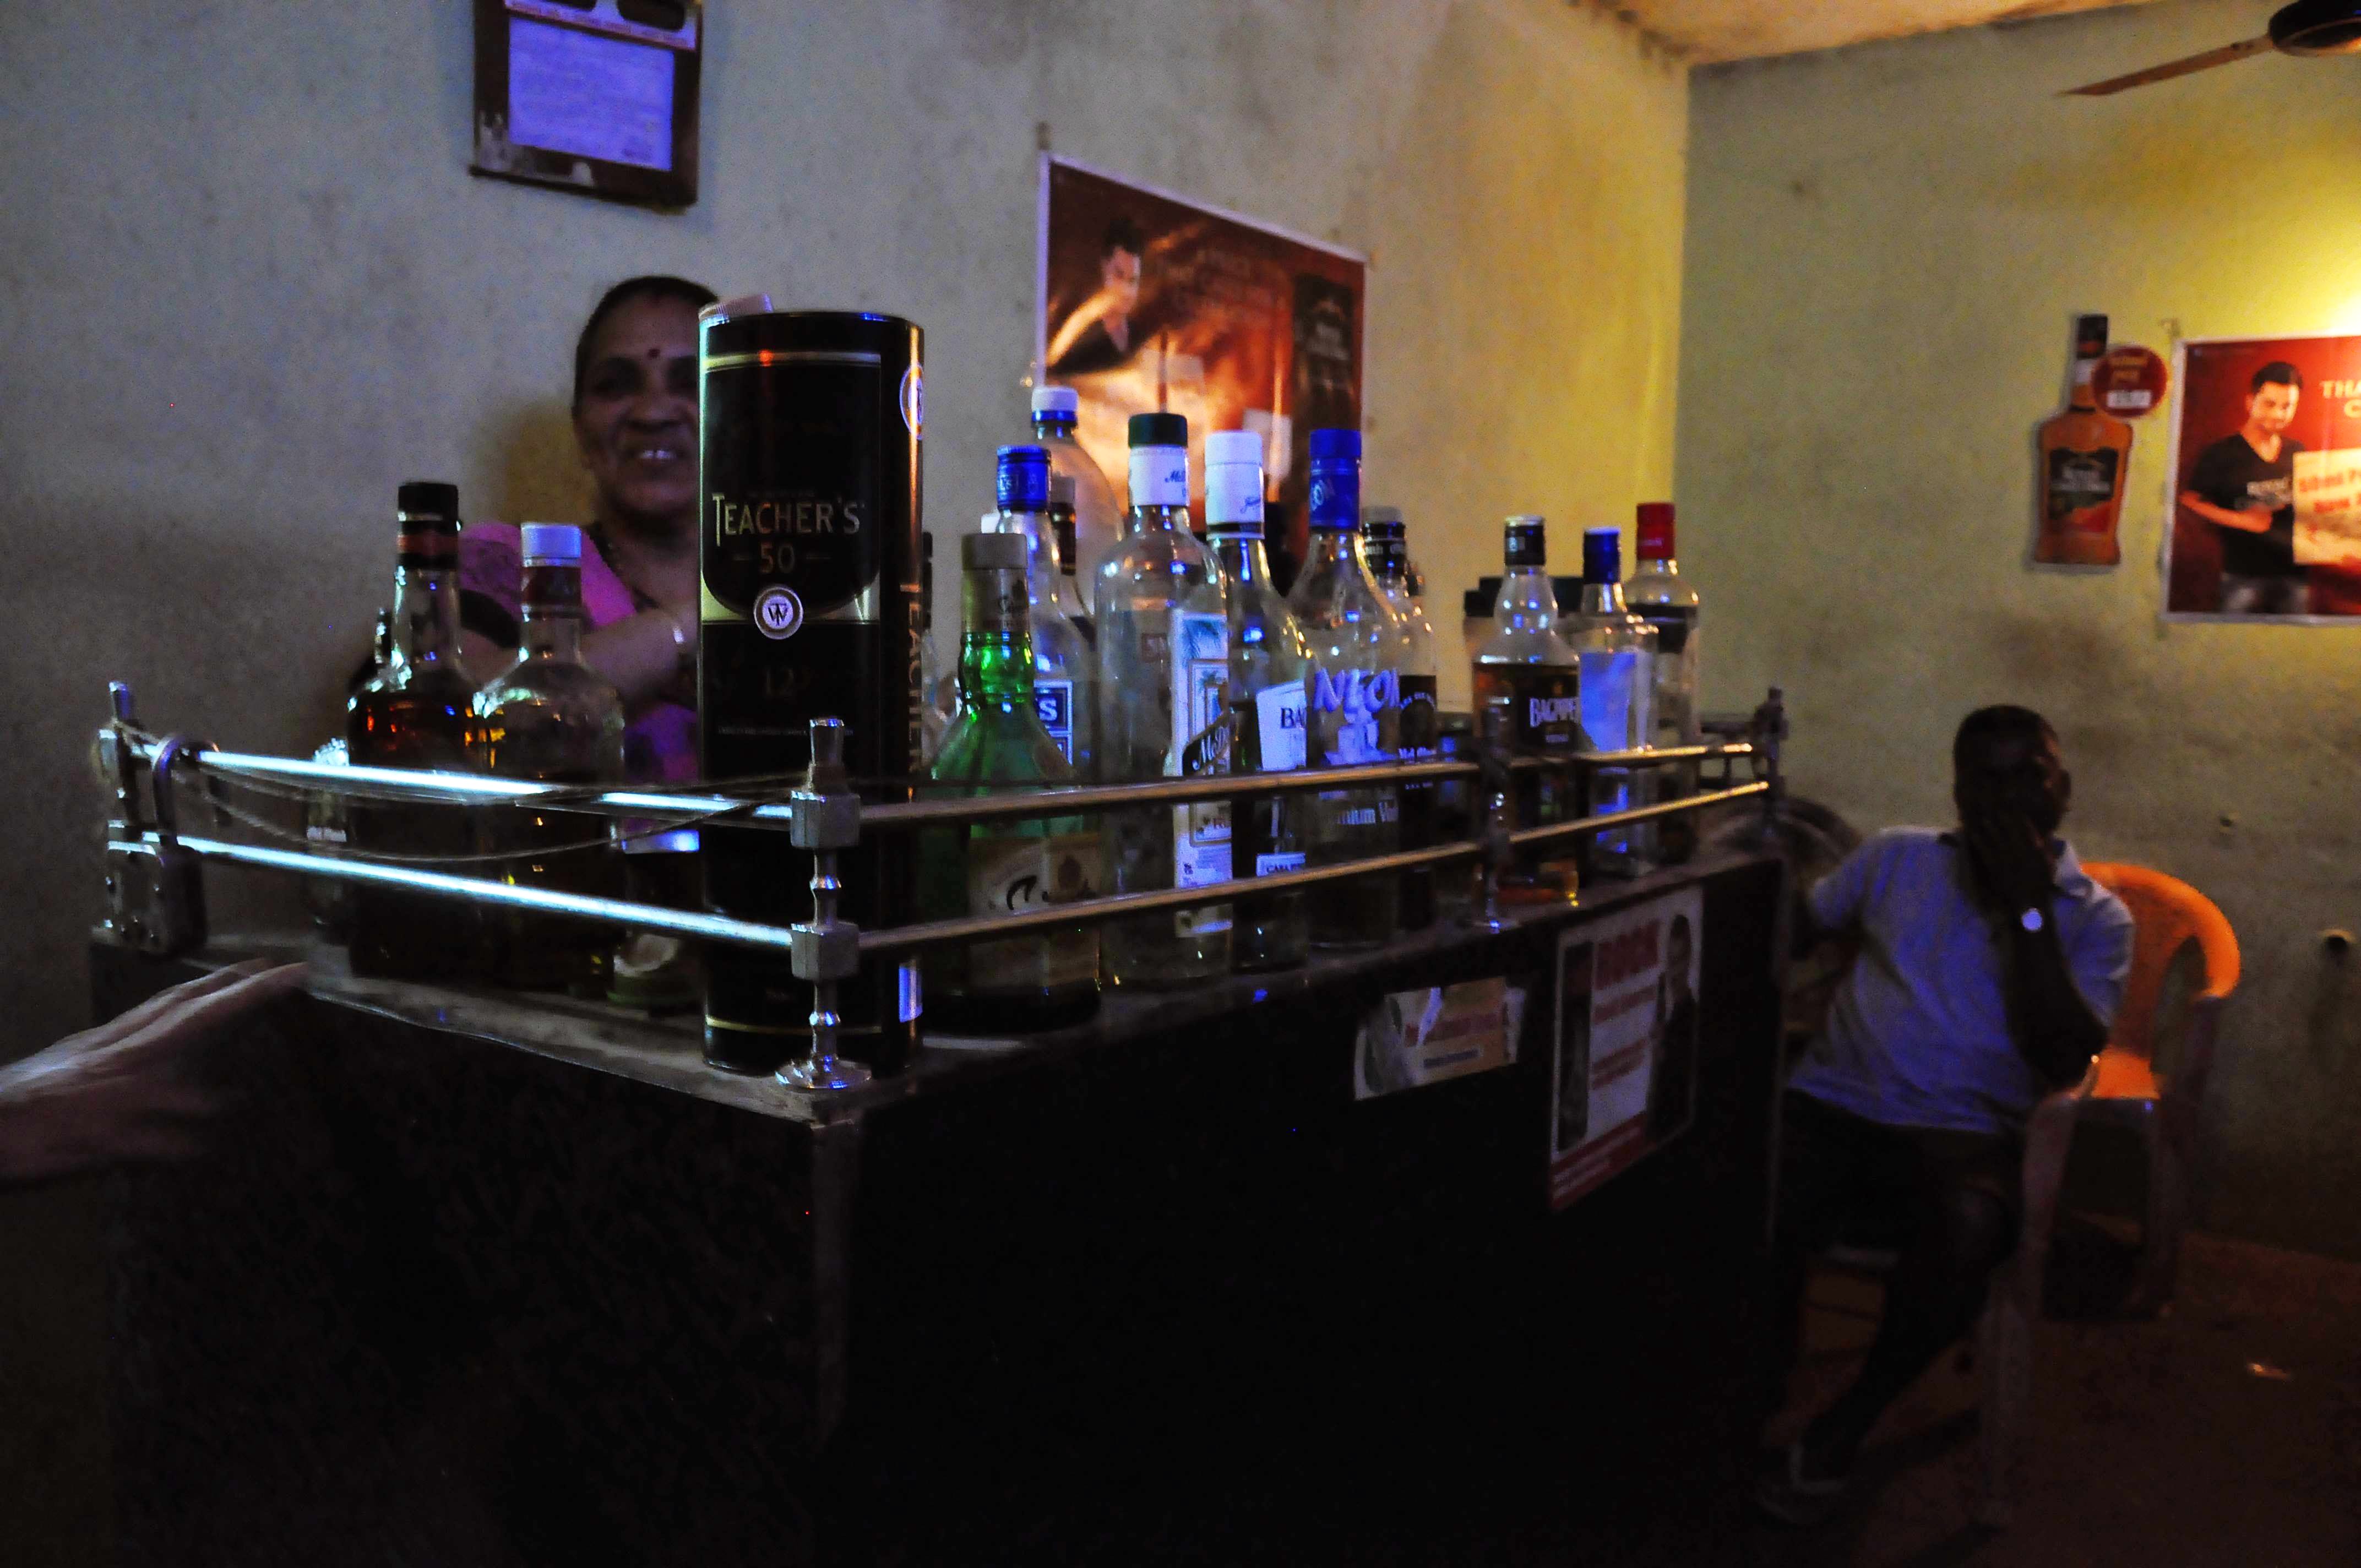 Bar,Room,Architecture,Event,Tourist attraction,Night,Drink